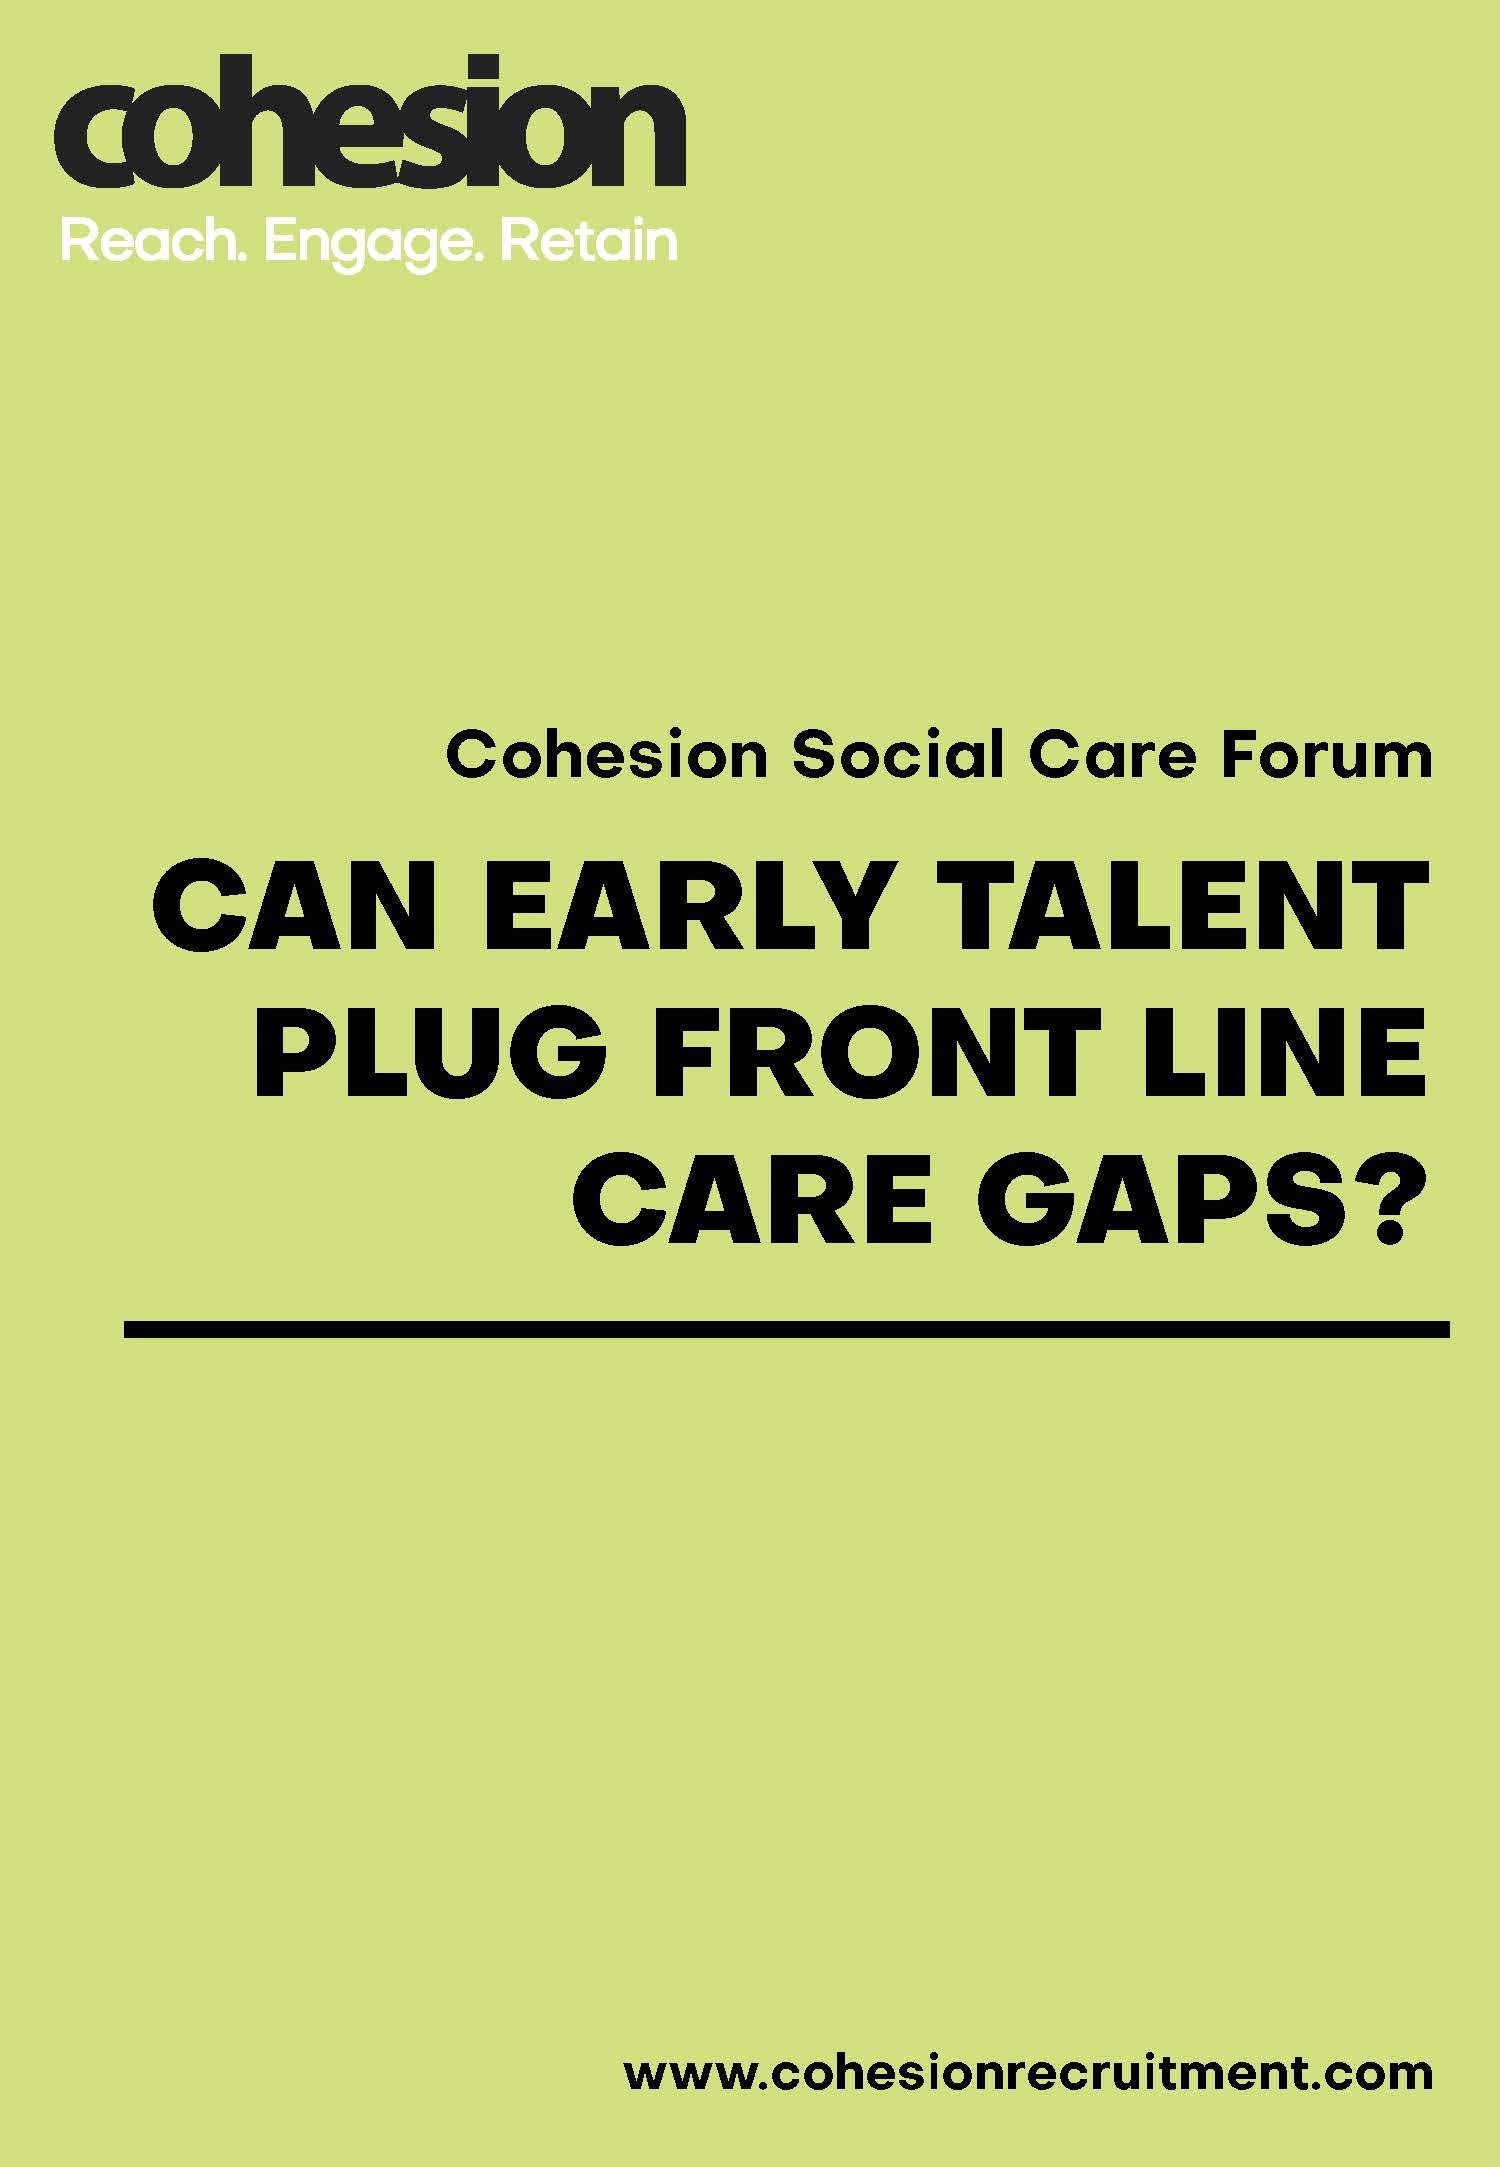 Can Early Talent Plug Frontline Care Gaps